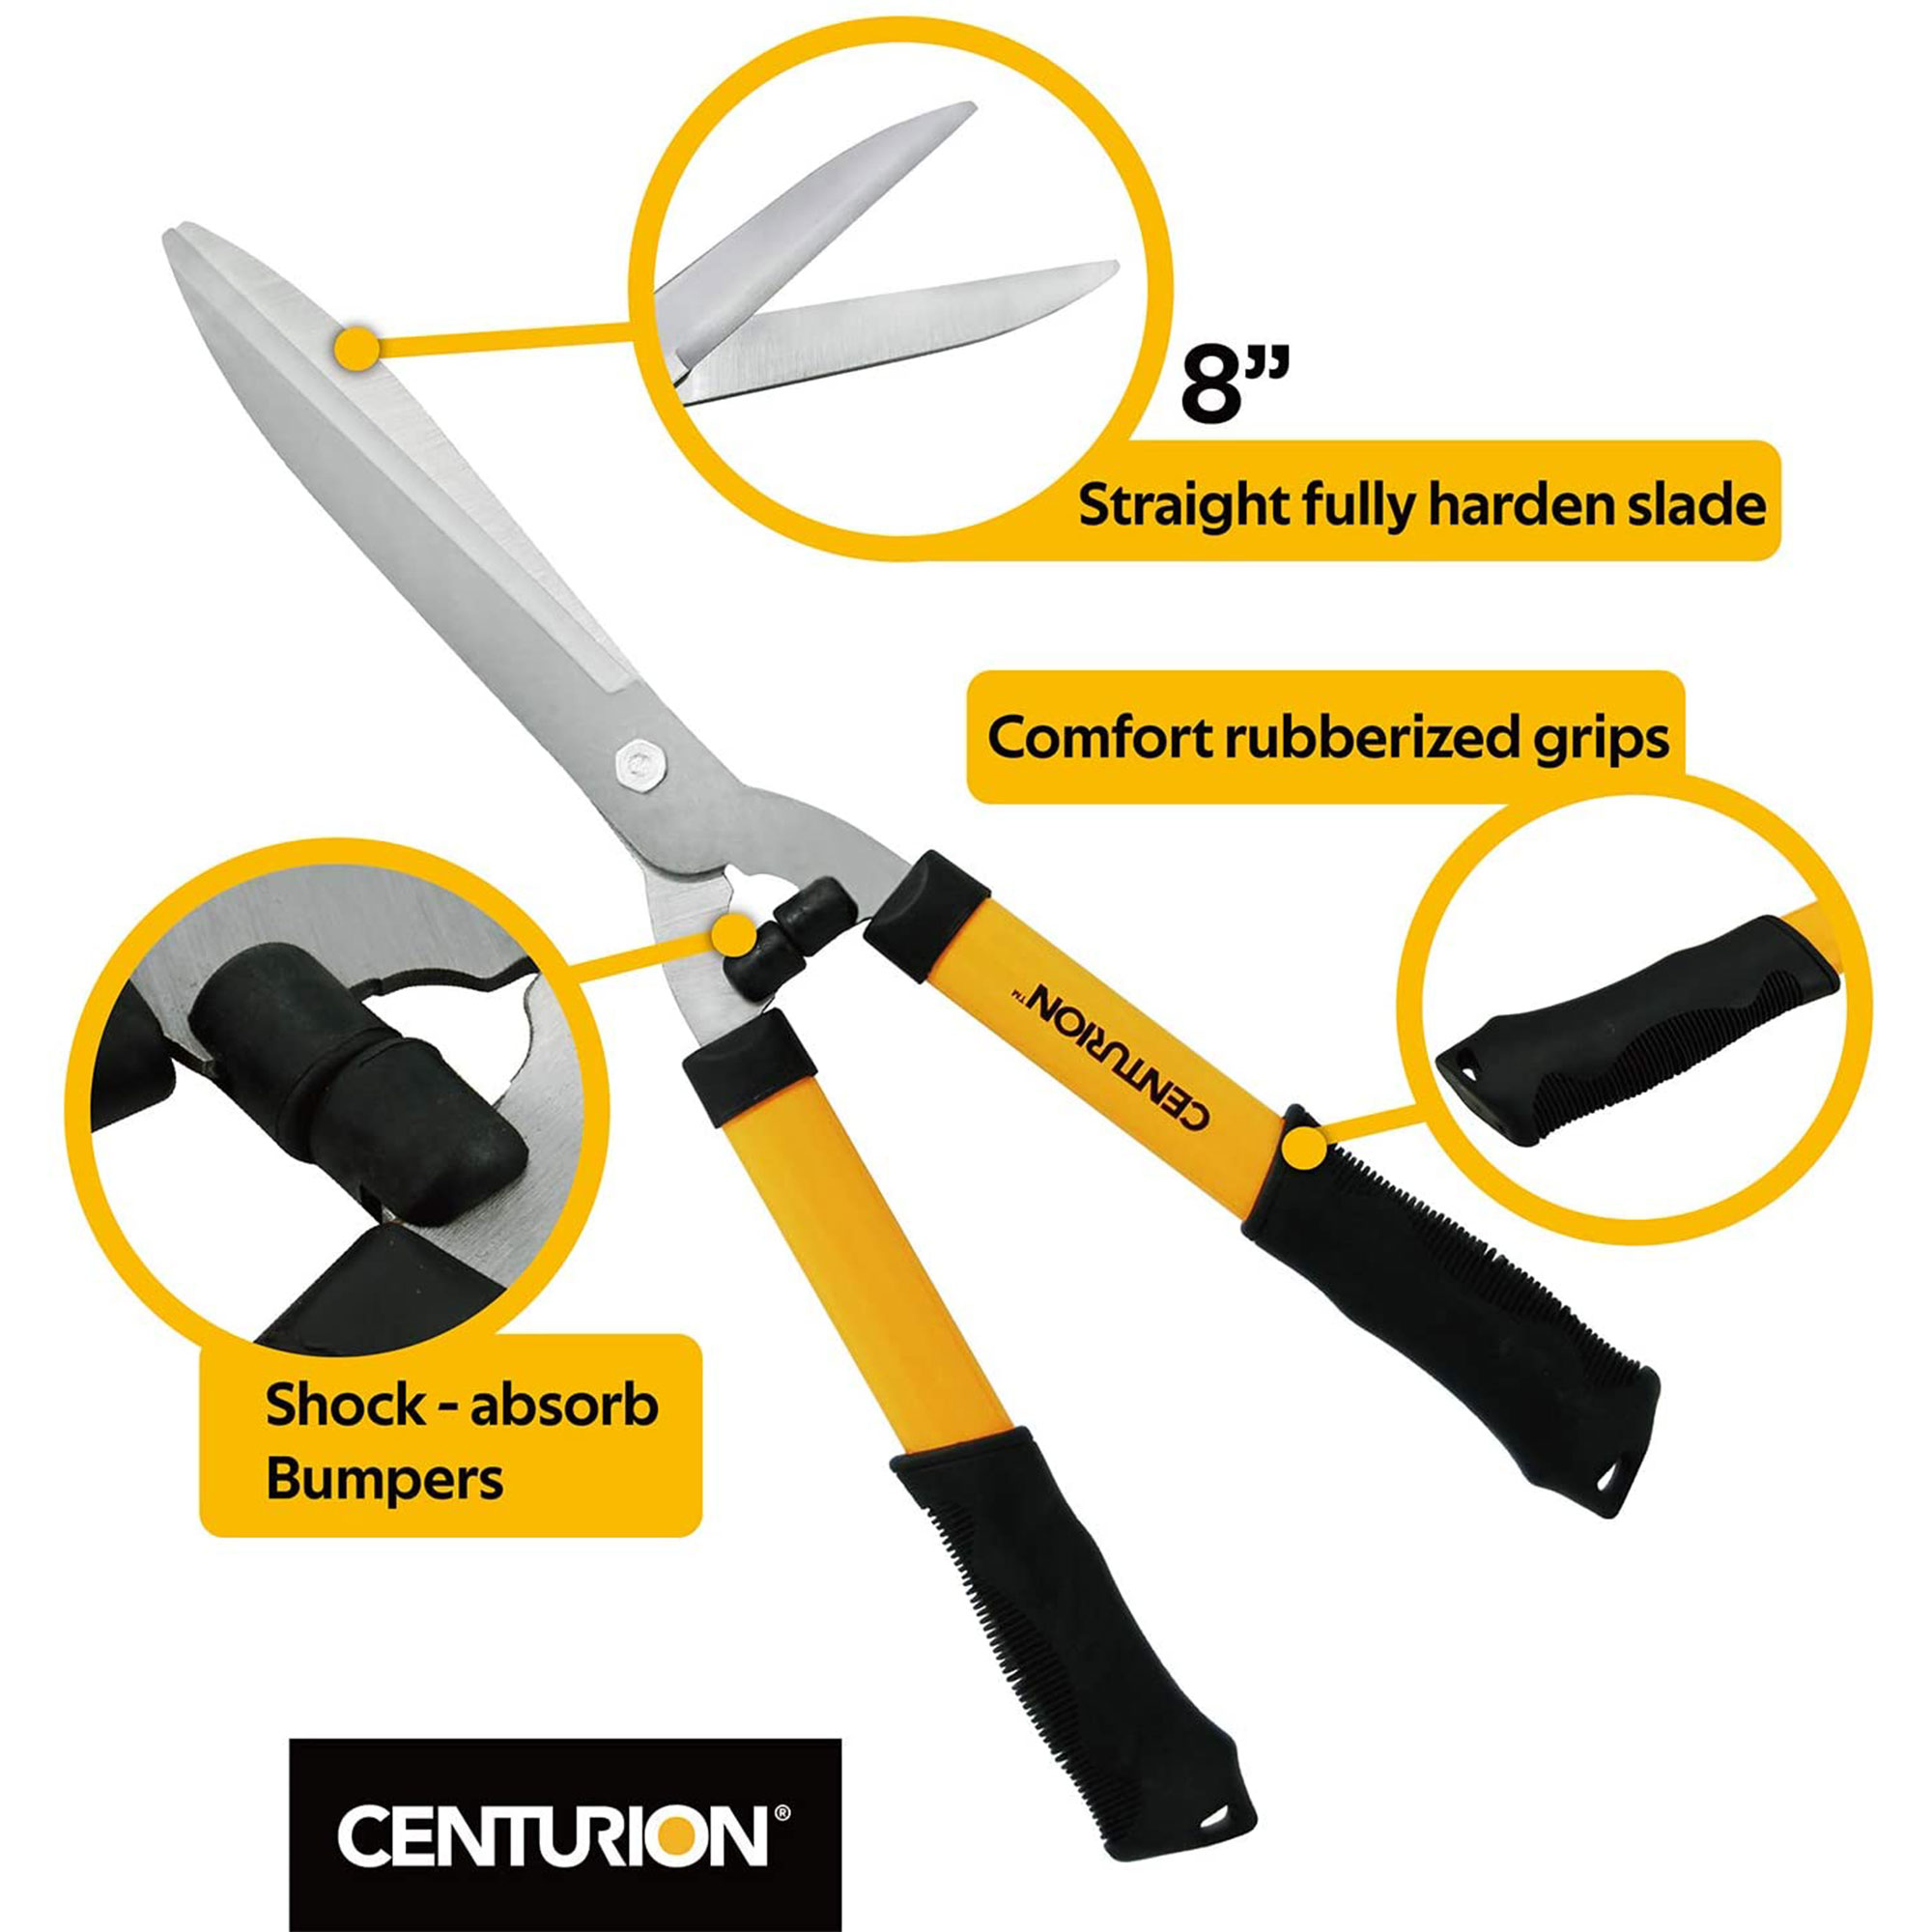 CENTURION 511 8 Inch Precision Steel Blades Hedge Shears w/ Non-Slip Grips - image 3 of 8